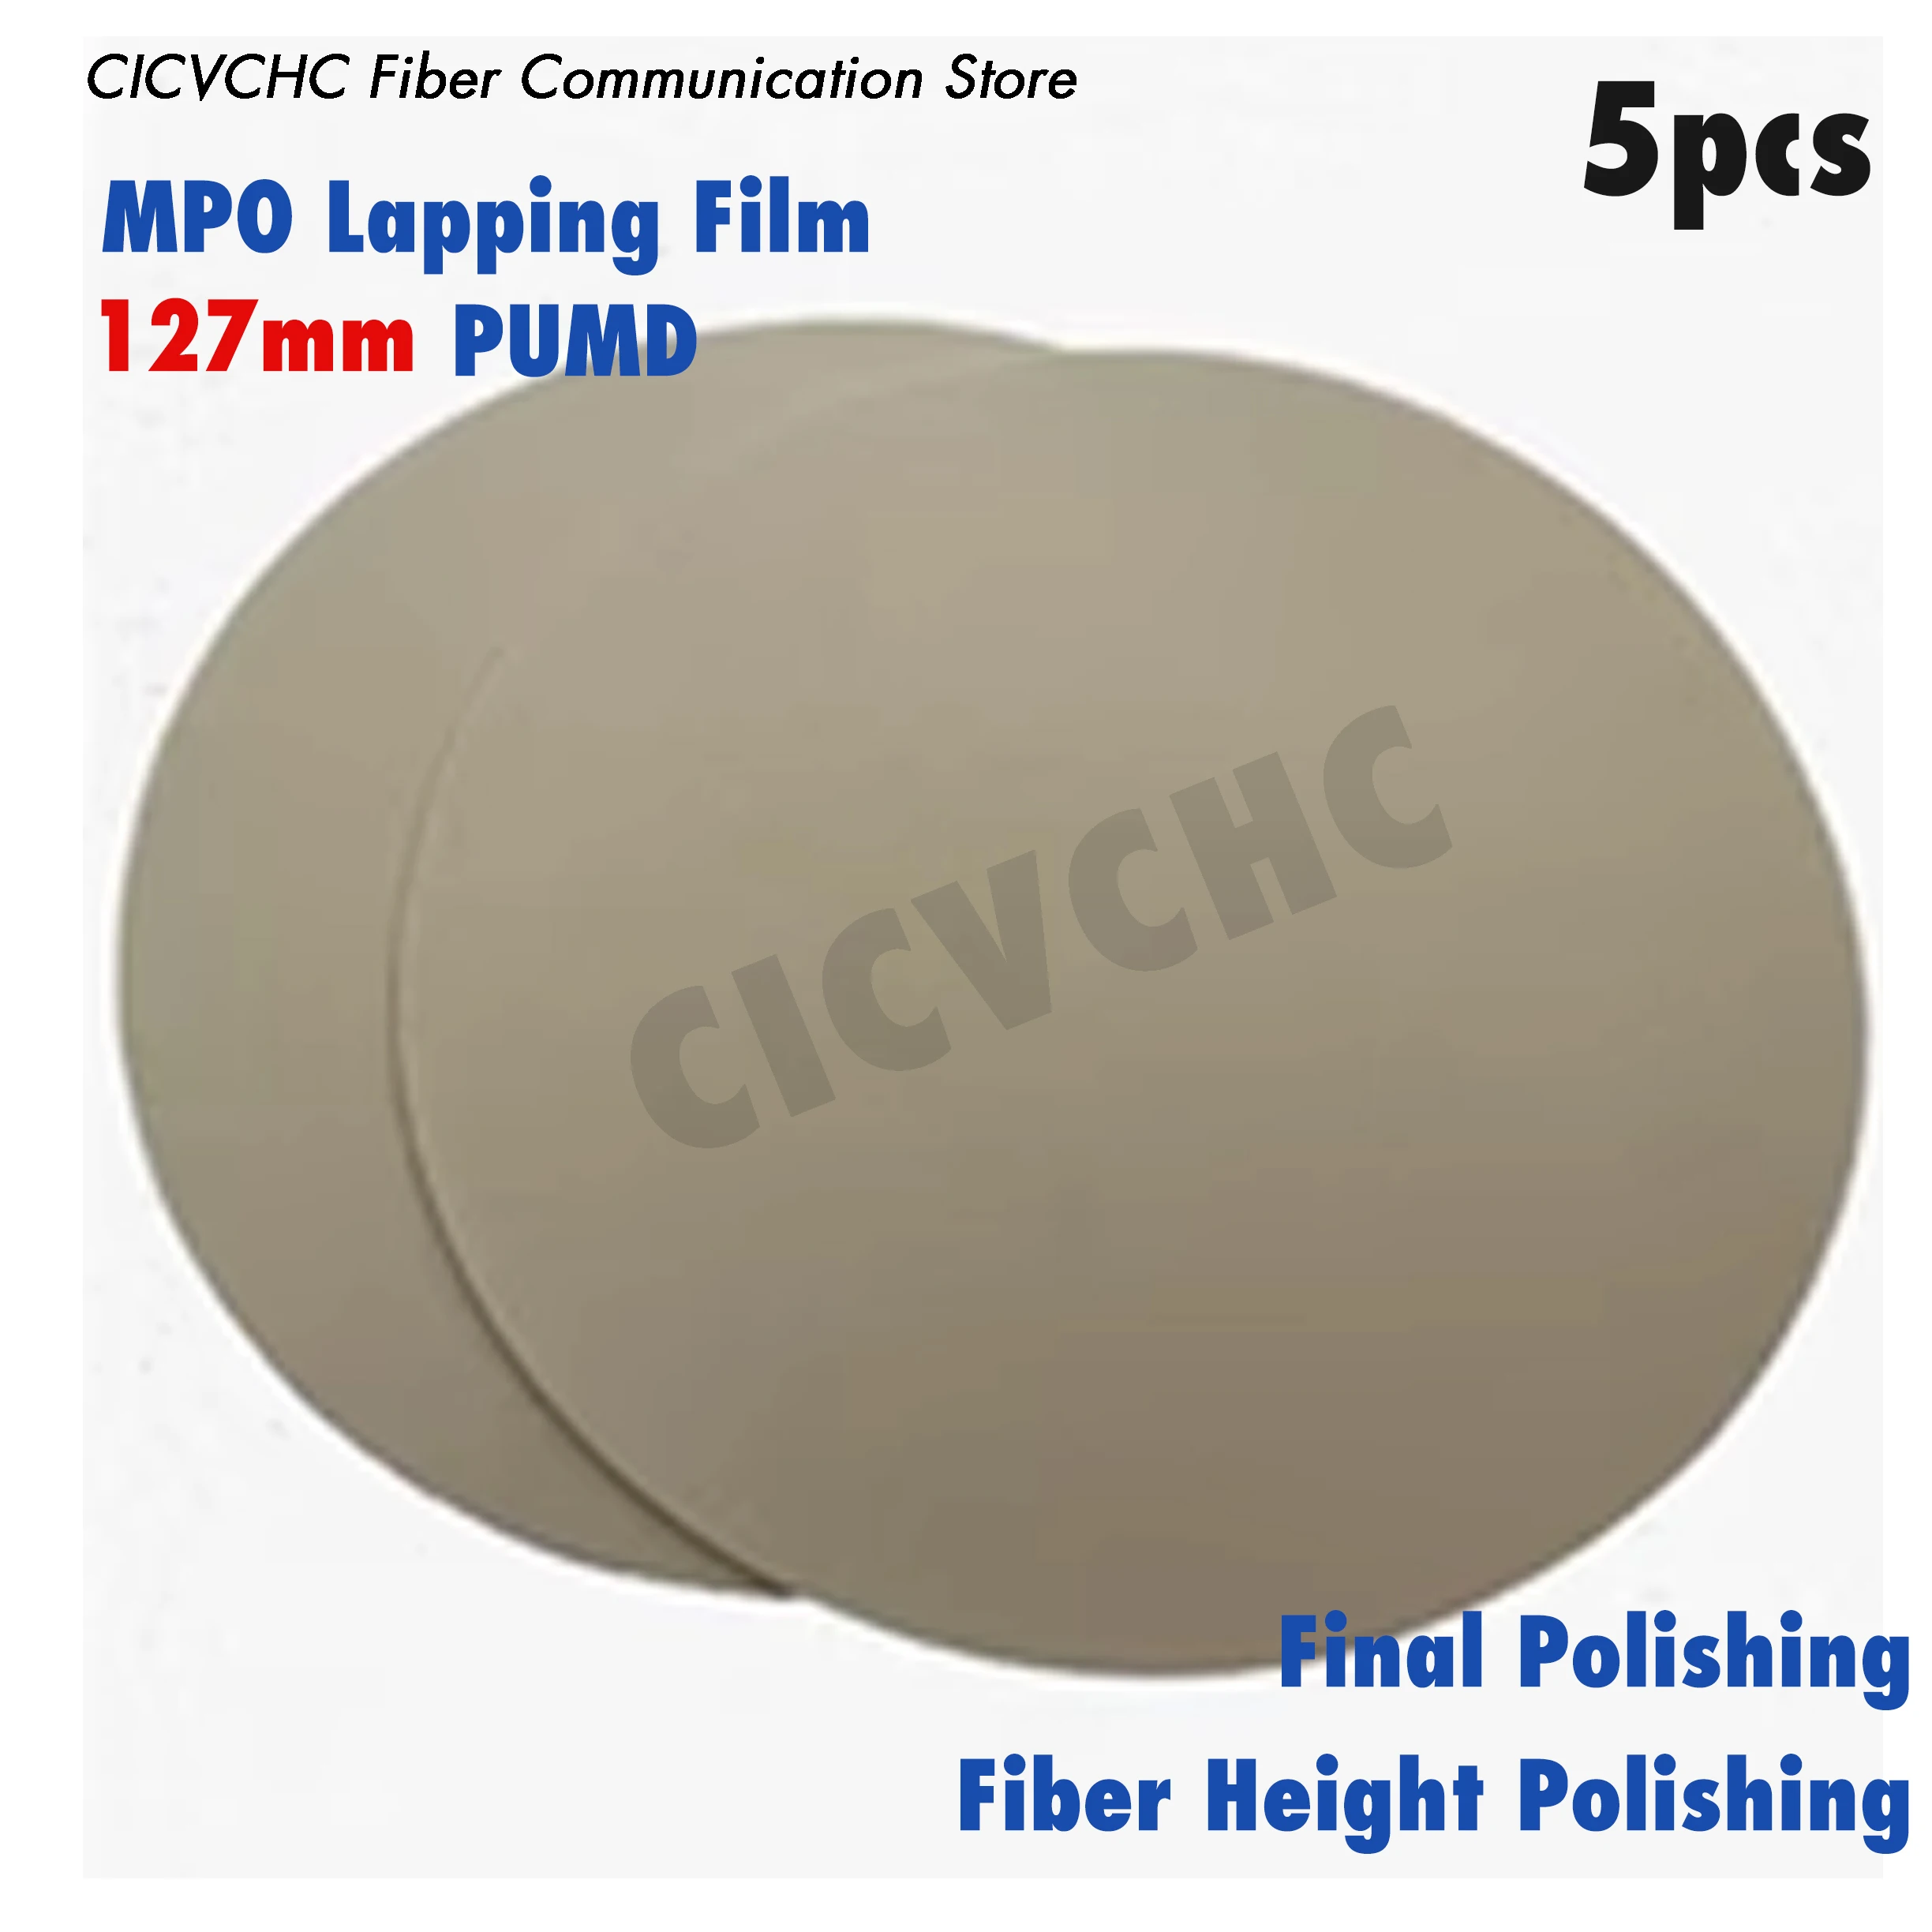 5pcs MTP/MPO Polishing Film Self-adhesive backing with 127mm hole saw cutting set kit tools 19 127mm 50 steel wood metal alloys circular round with case blue red yellow gray 5 8 13pcs